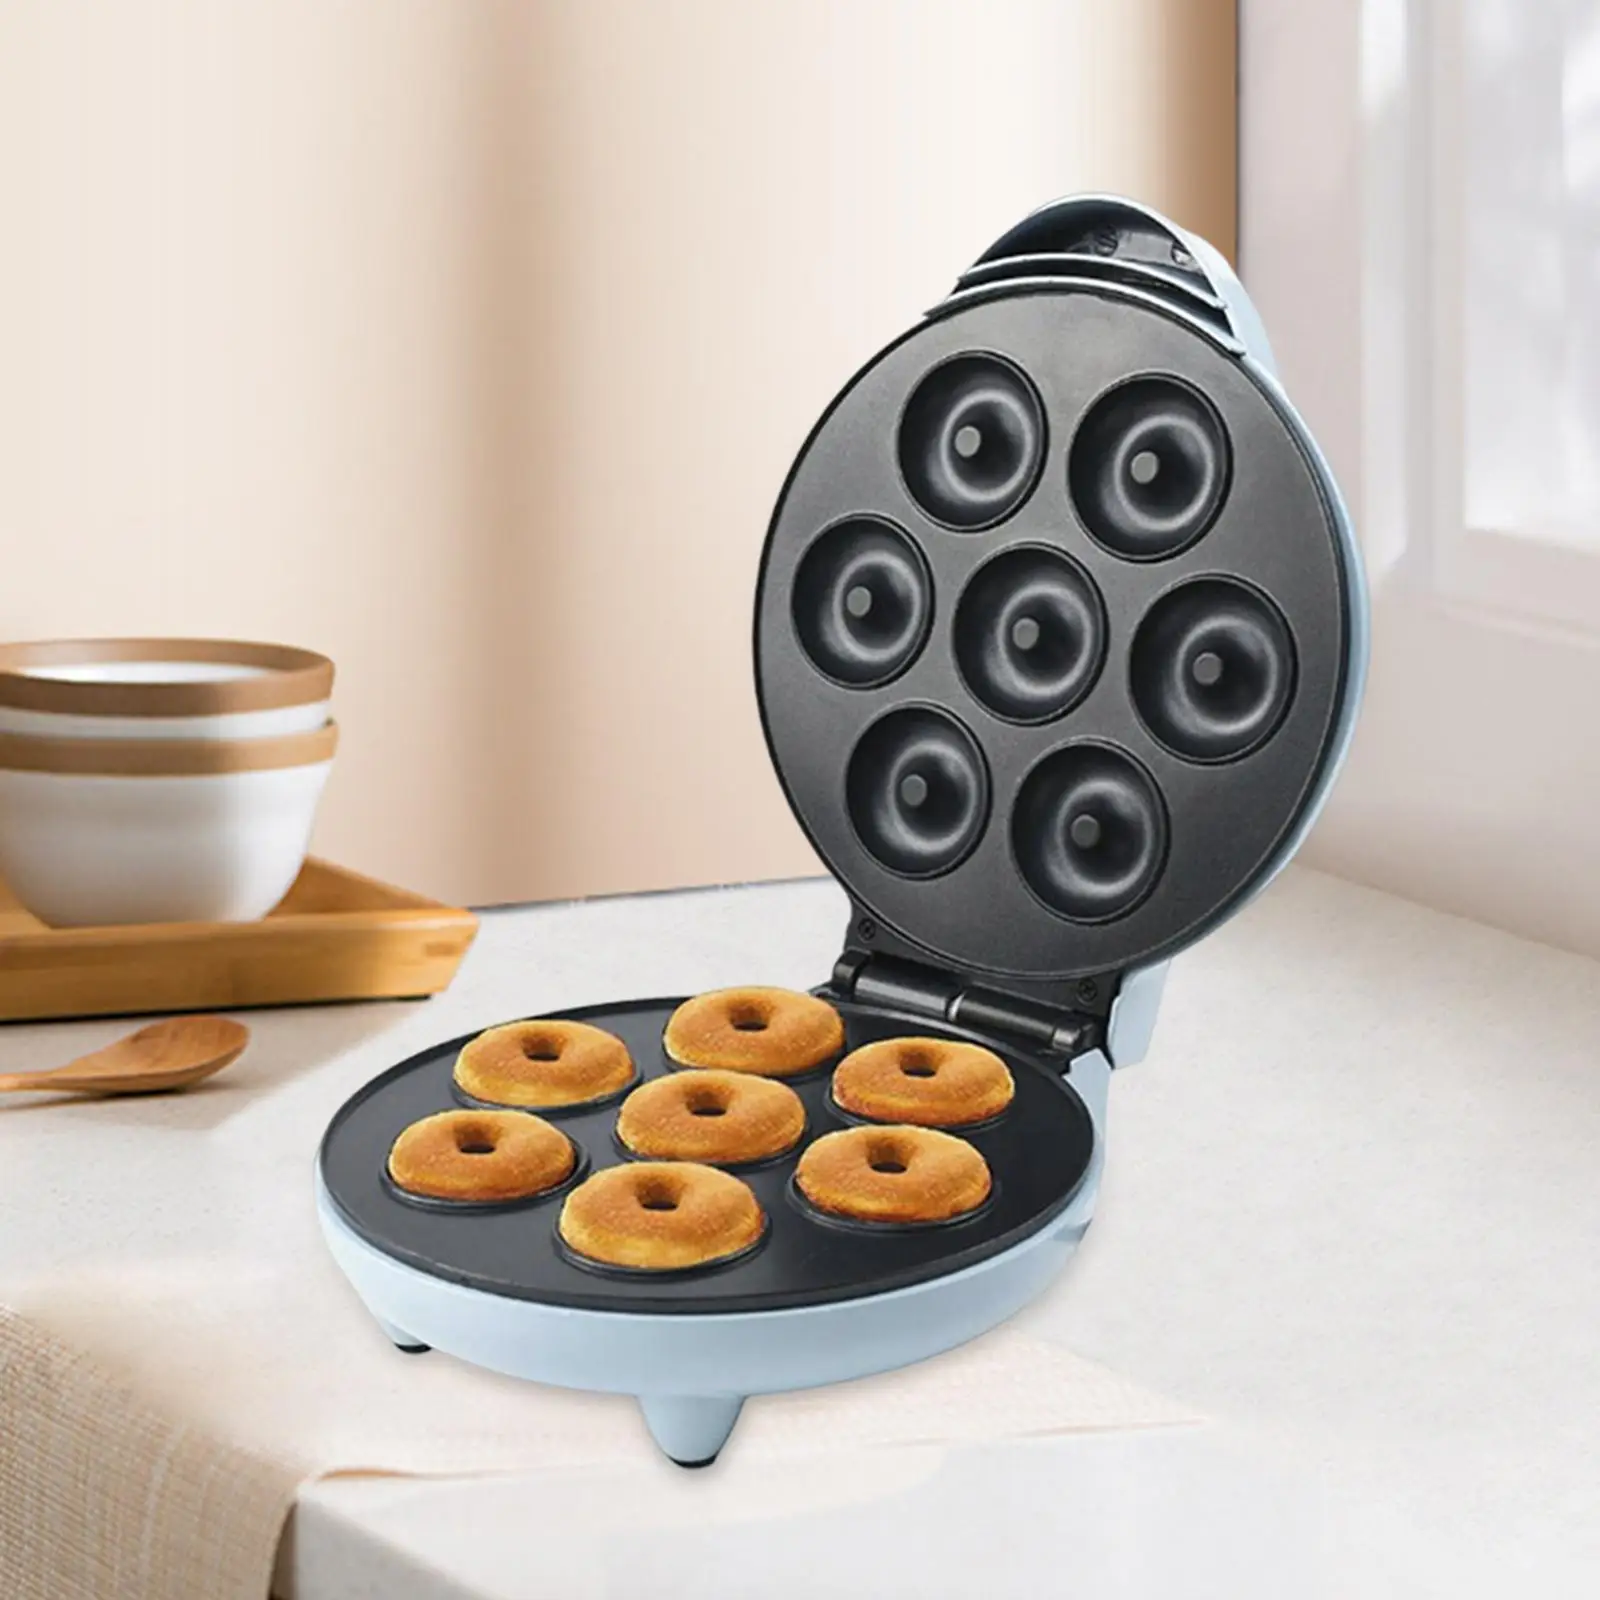 Donut Maker Nonstick Household Cake Machine Automatic Heating Egg Cake Bread Baking Machine for Commercial Use DIY Desserts